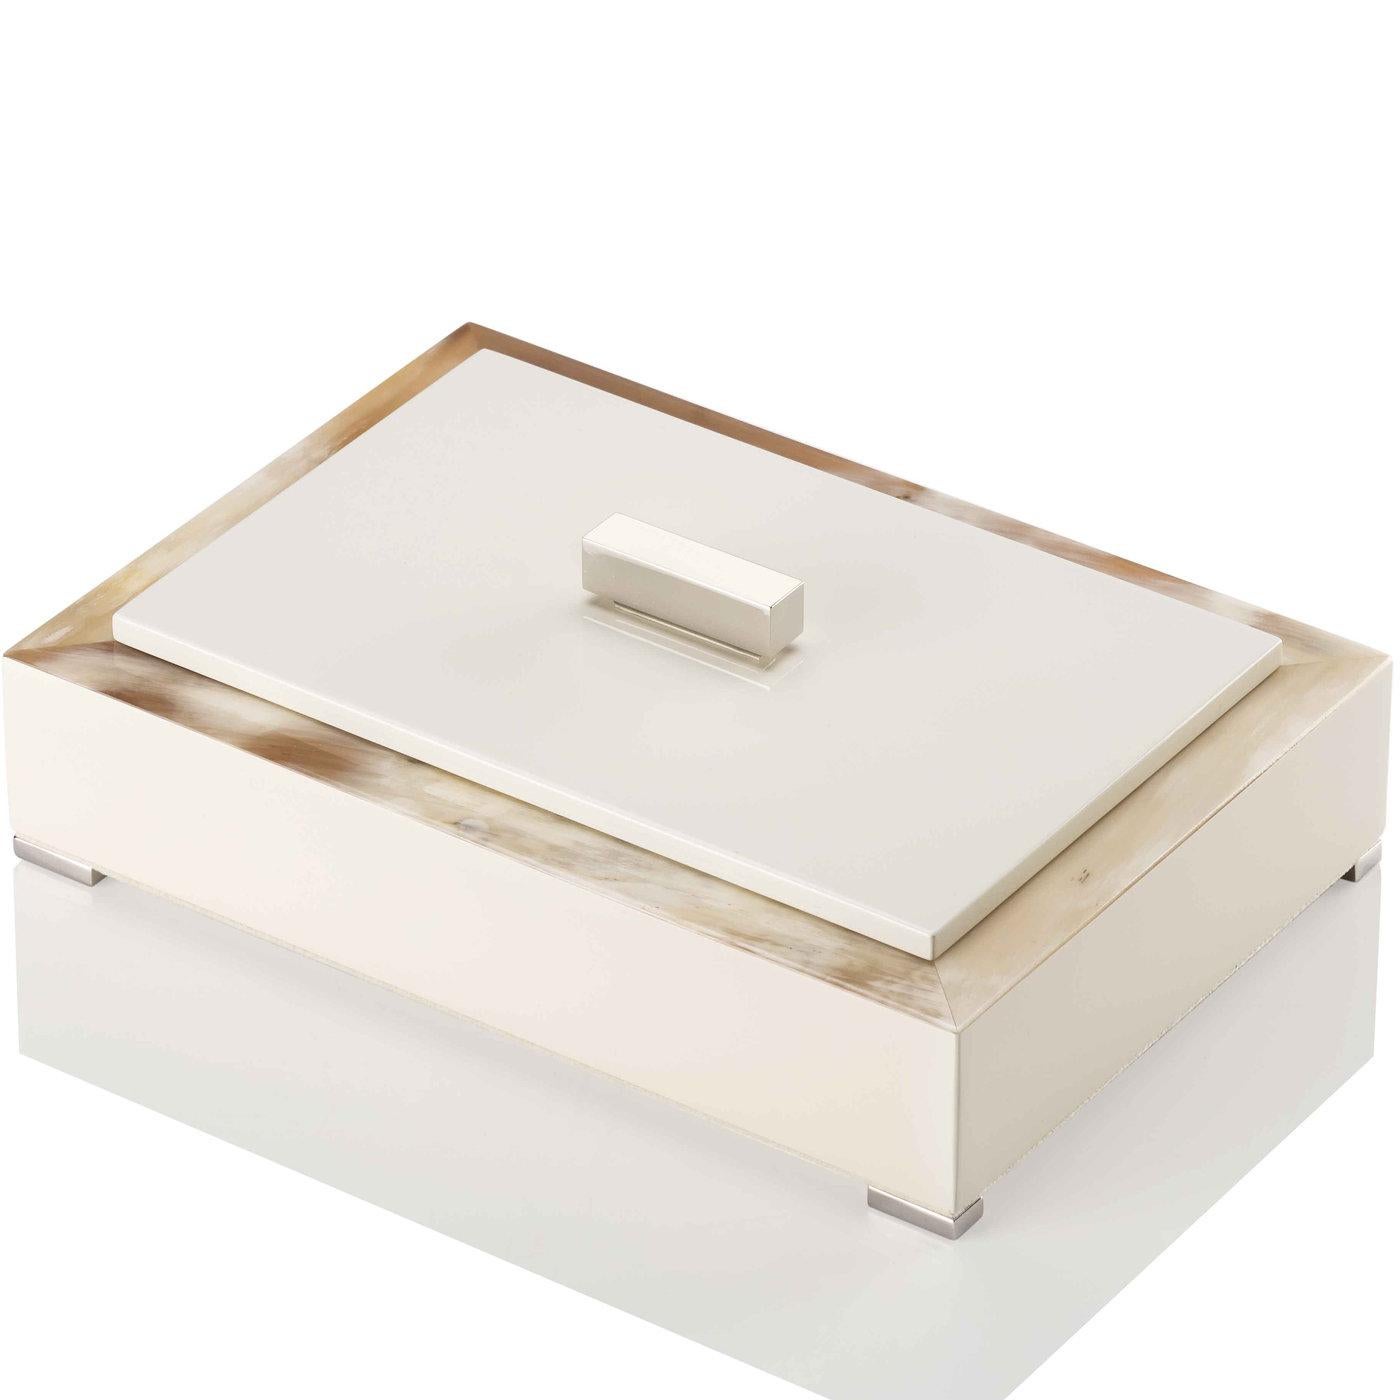 Exuding a lavish flair intertwined with its geometrical design, this refined ivory storage box showcases a precious structure in horn and wood and a rectangular lid in the same lacquered, glossy finish with a chromed brass handle. The interior is